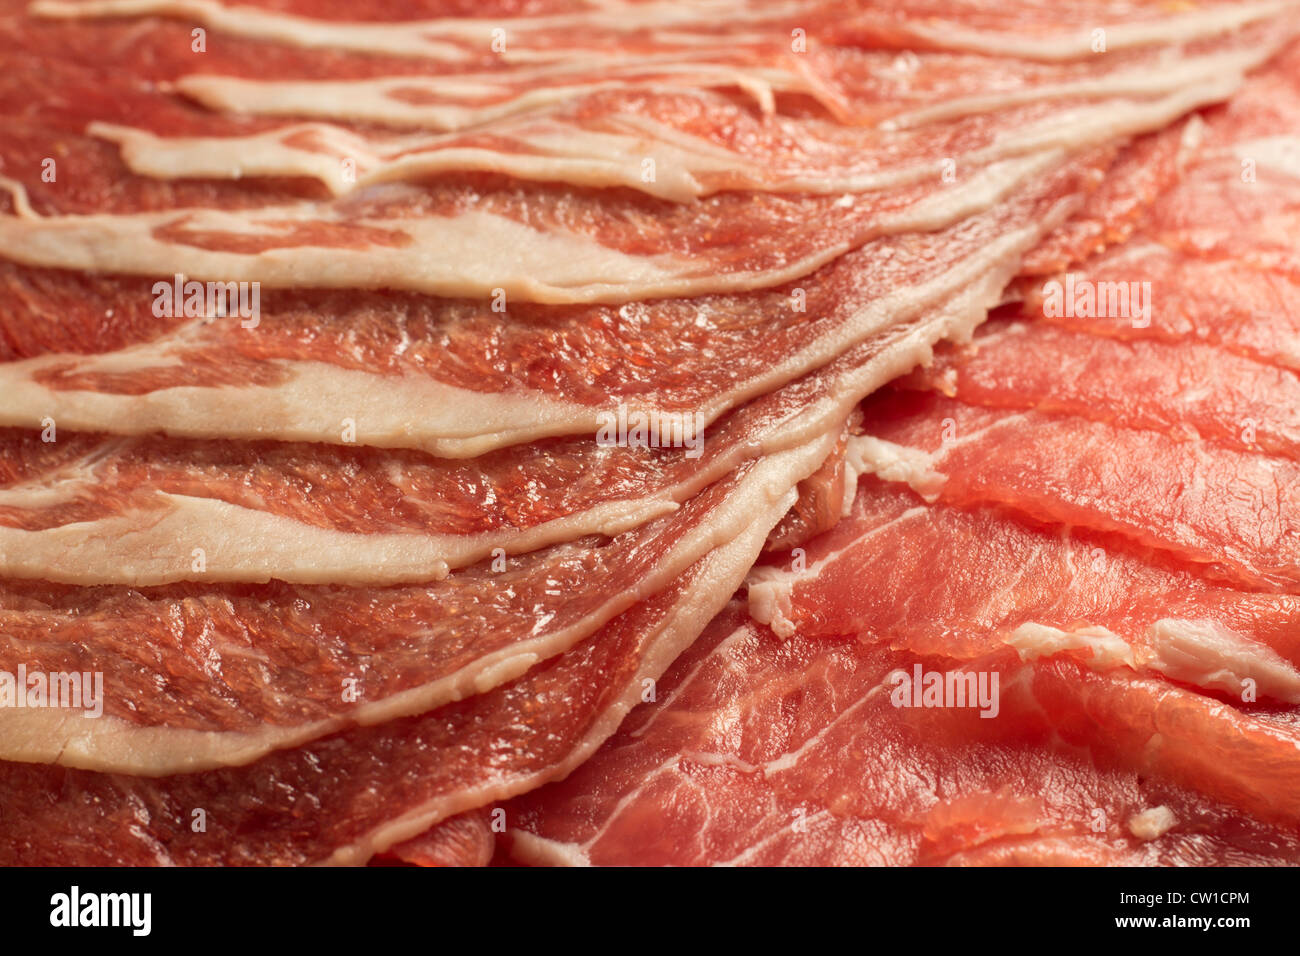 slices of raw lamb meat Stock Photo